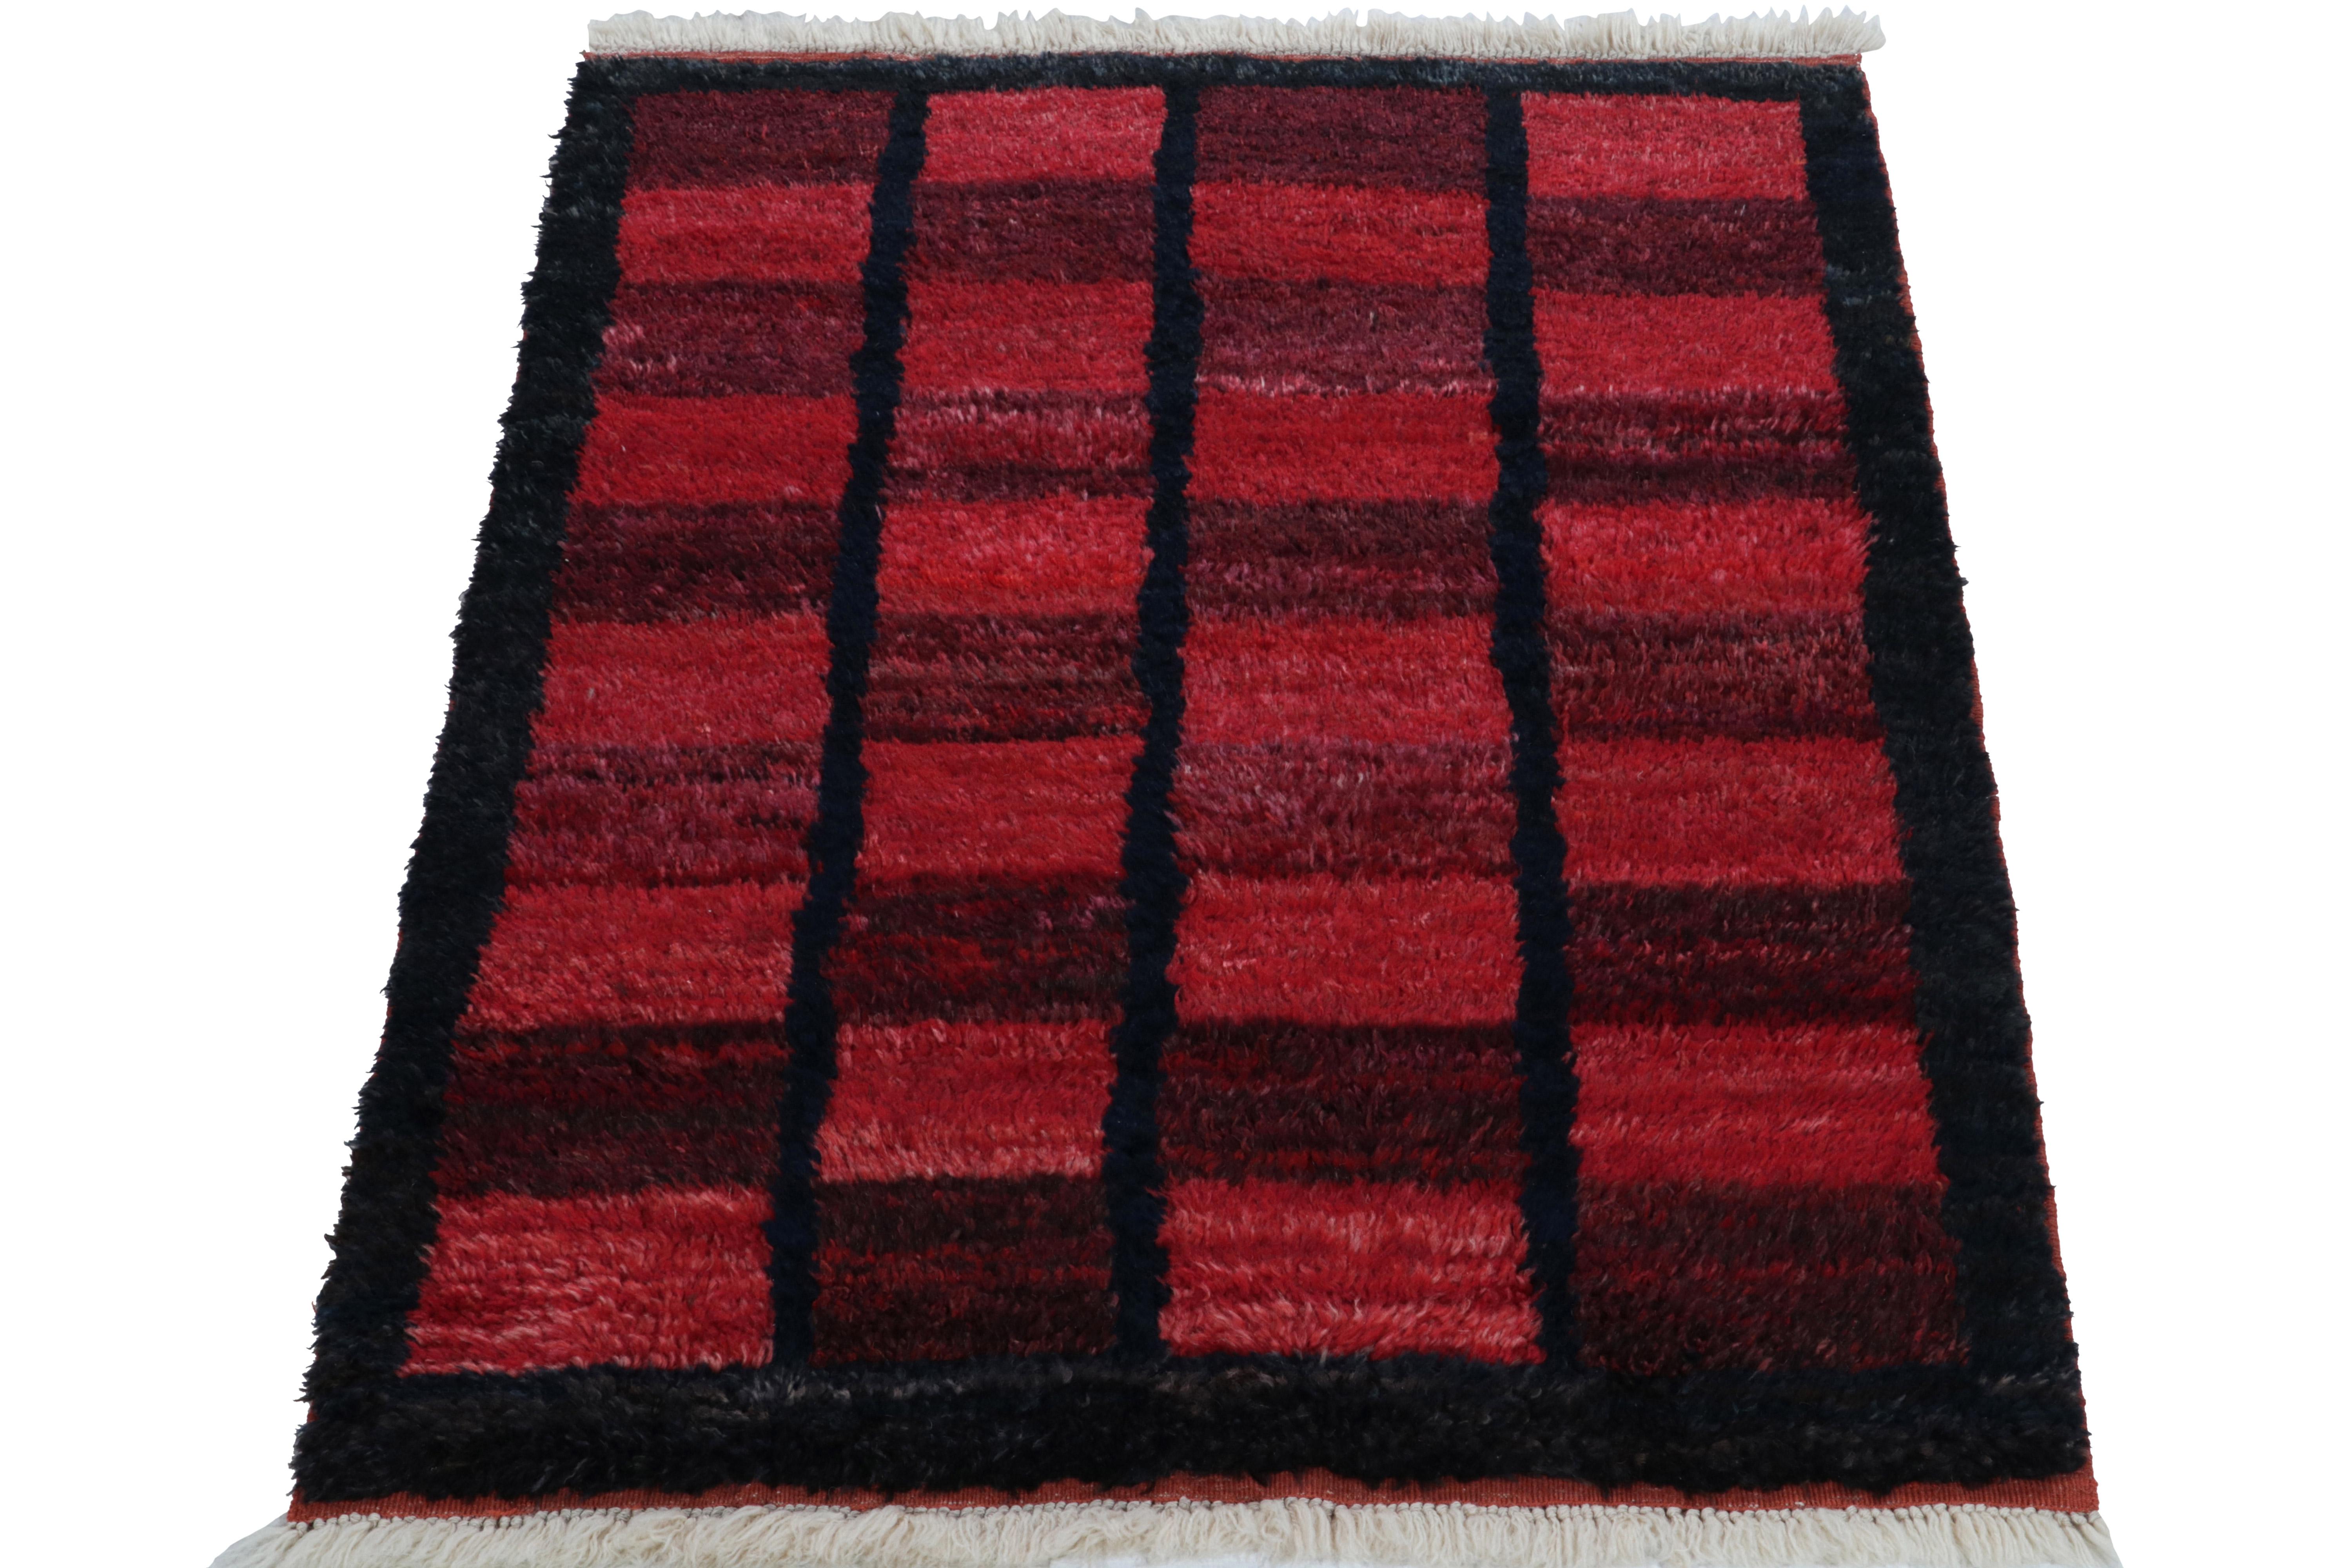 Hand-knotted in wool, a 3x5 vintage Tulu rug originating from Turkey circa 1950-1960, now joining Rug & Kilim’s Antique & Vintage collection. The rug enjoys mid century aesthetics with a well defined geometric pattern in deep blue, carrot red &